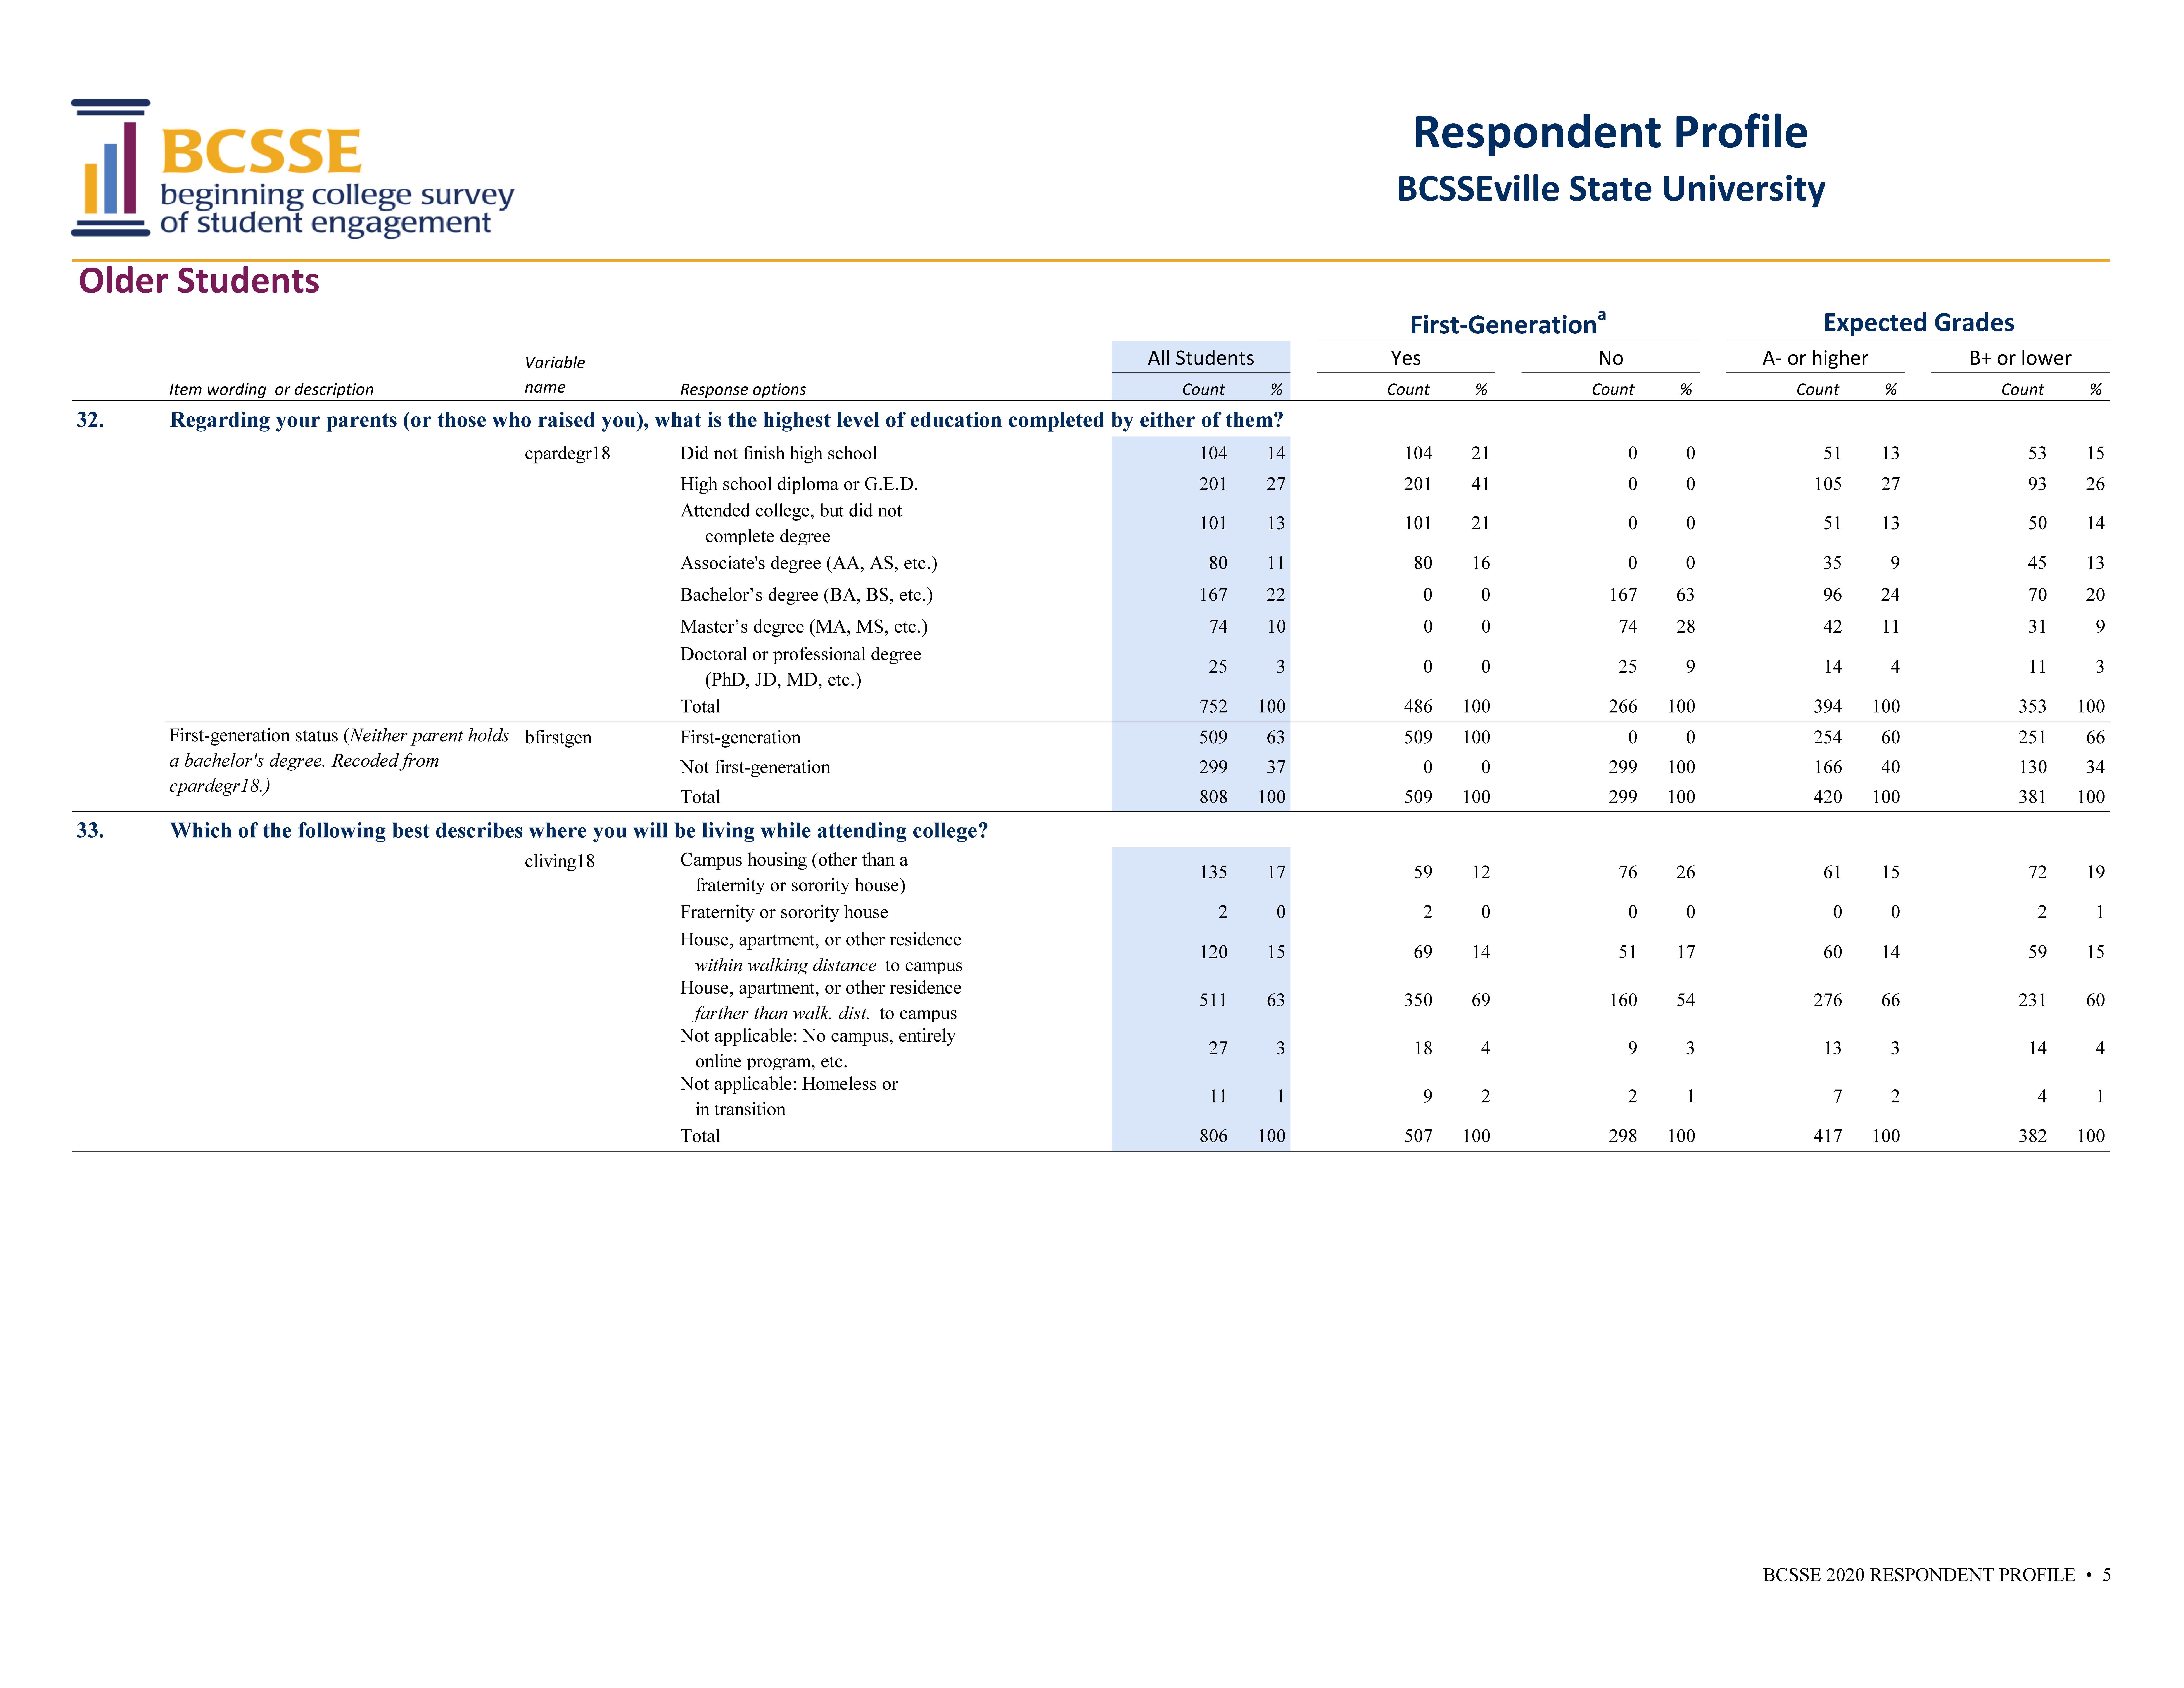 BCSSE Institutional Report example for Older students.